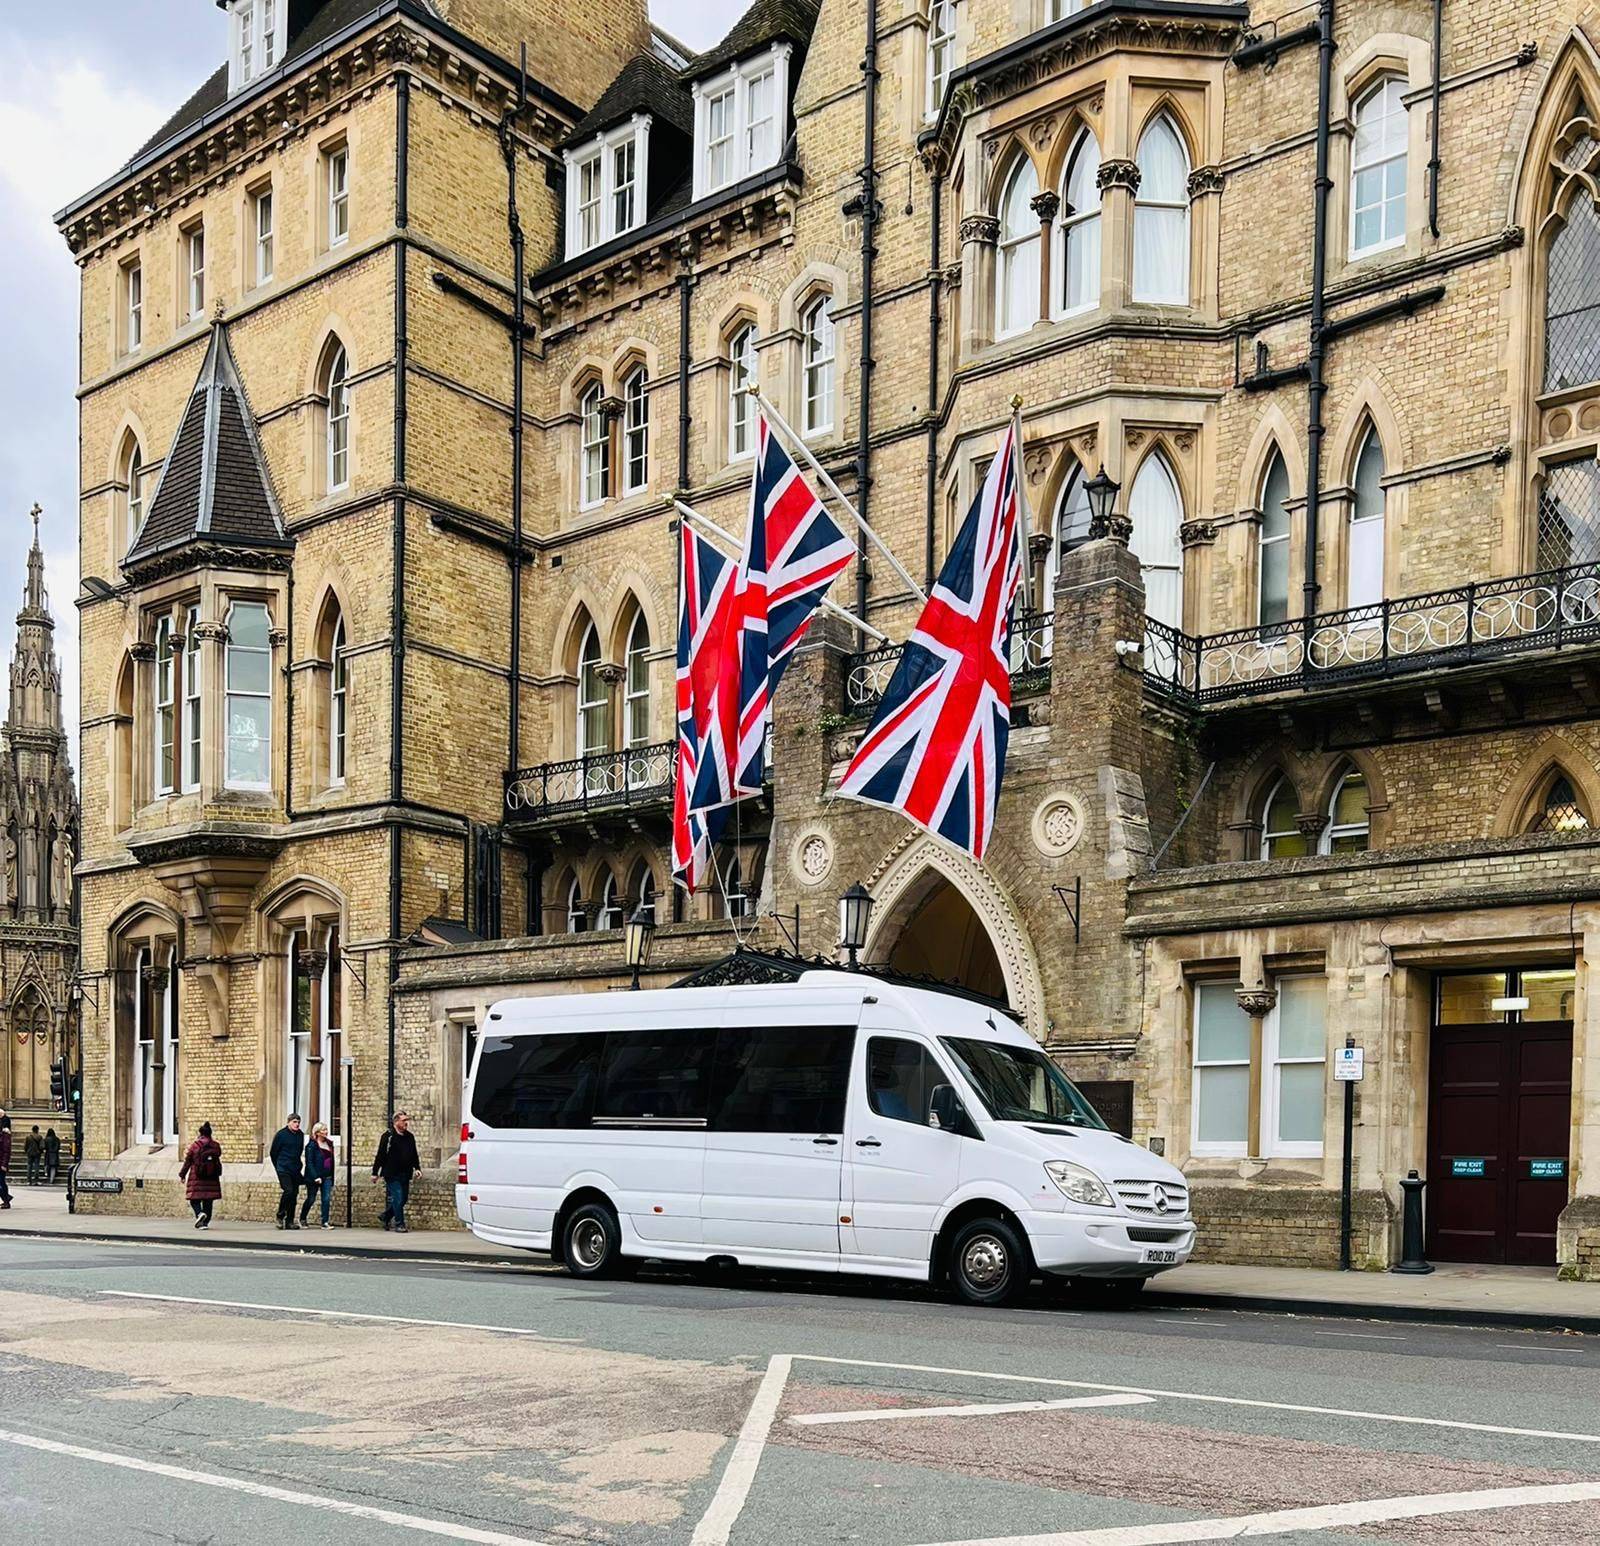 A white minibus parked in front of a building adorned with British flags.